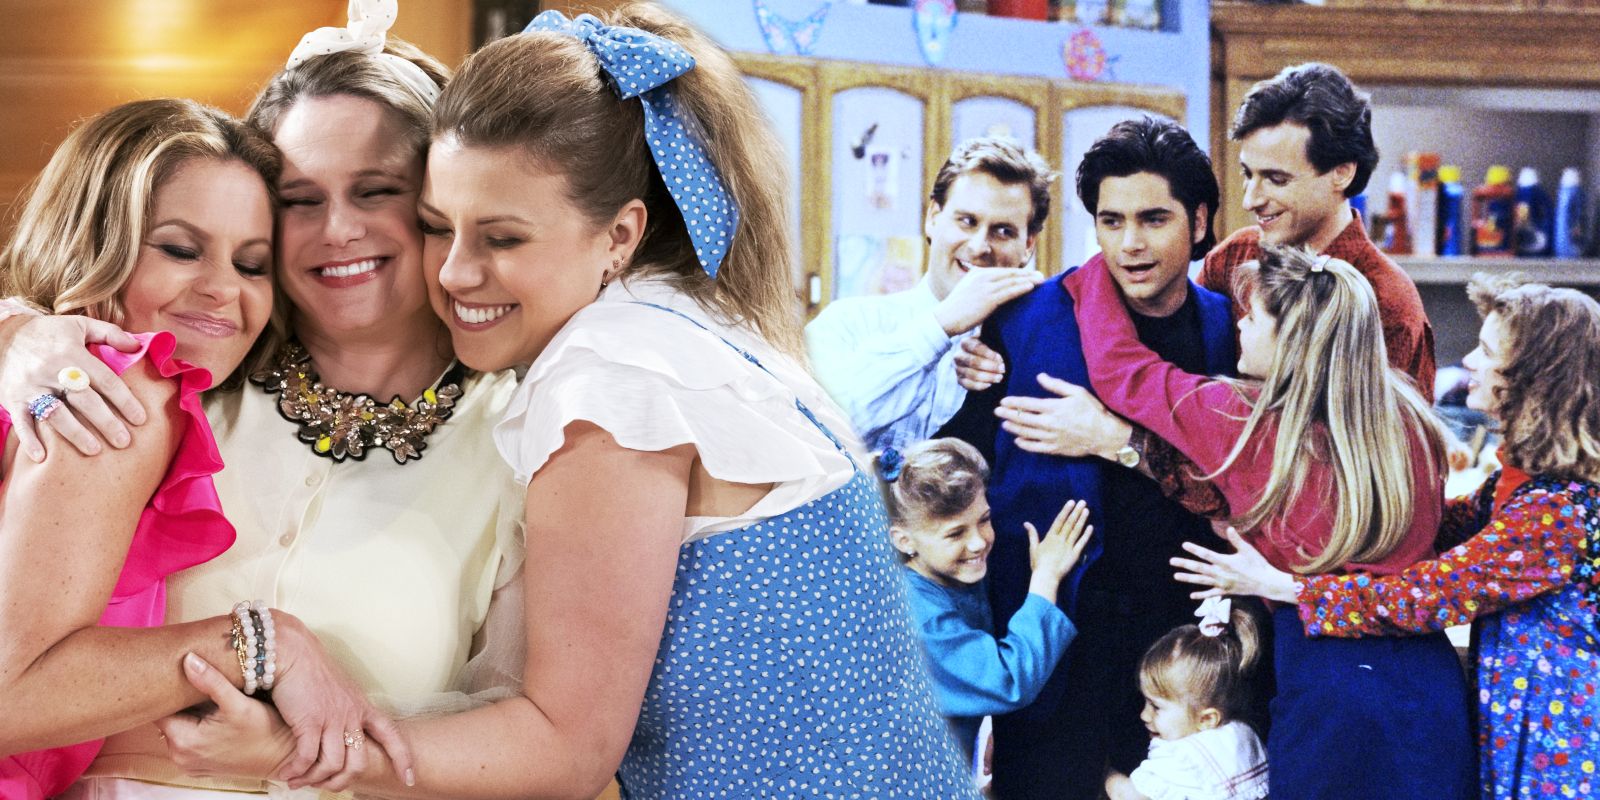 DJ, Kimmy, and Stephanie hugging in Fuller House and Danny, Joey, Jesse, DJ, Kimmy, Stephanie, and Michelle hugging in Full House